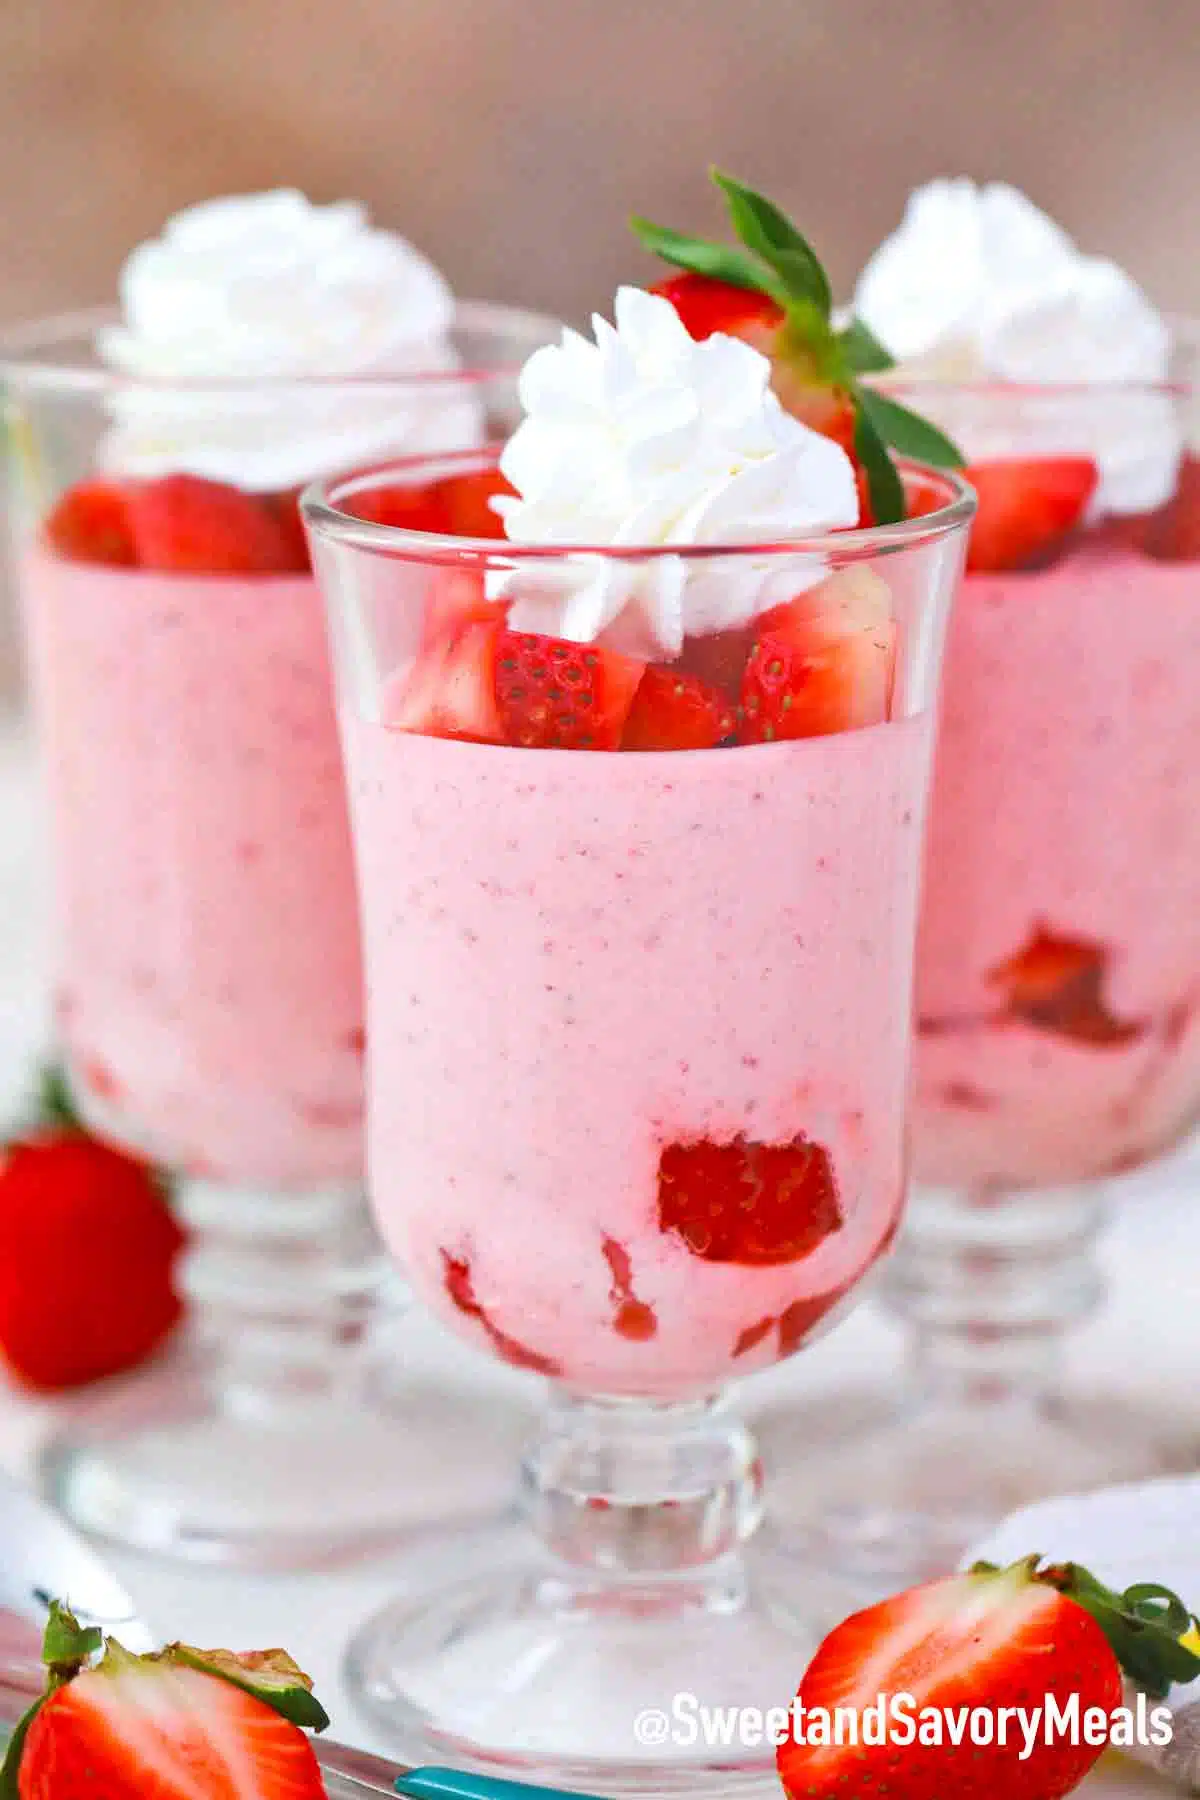 25 Best Strawberry Recipes, From Sweet to Savory